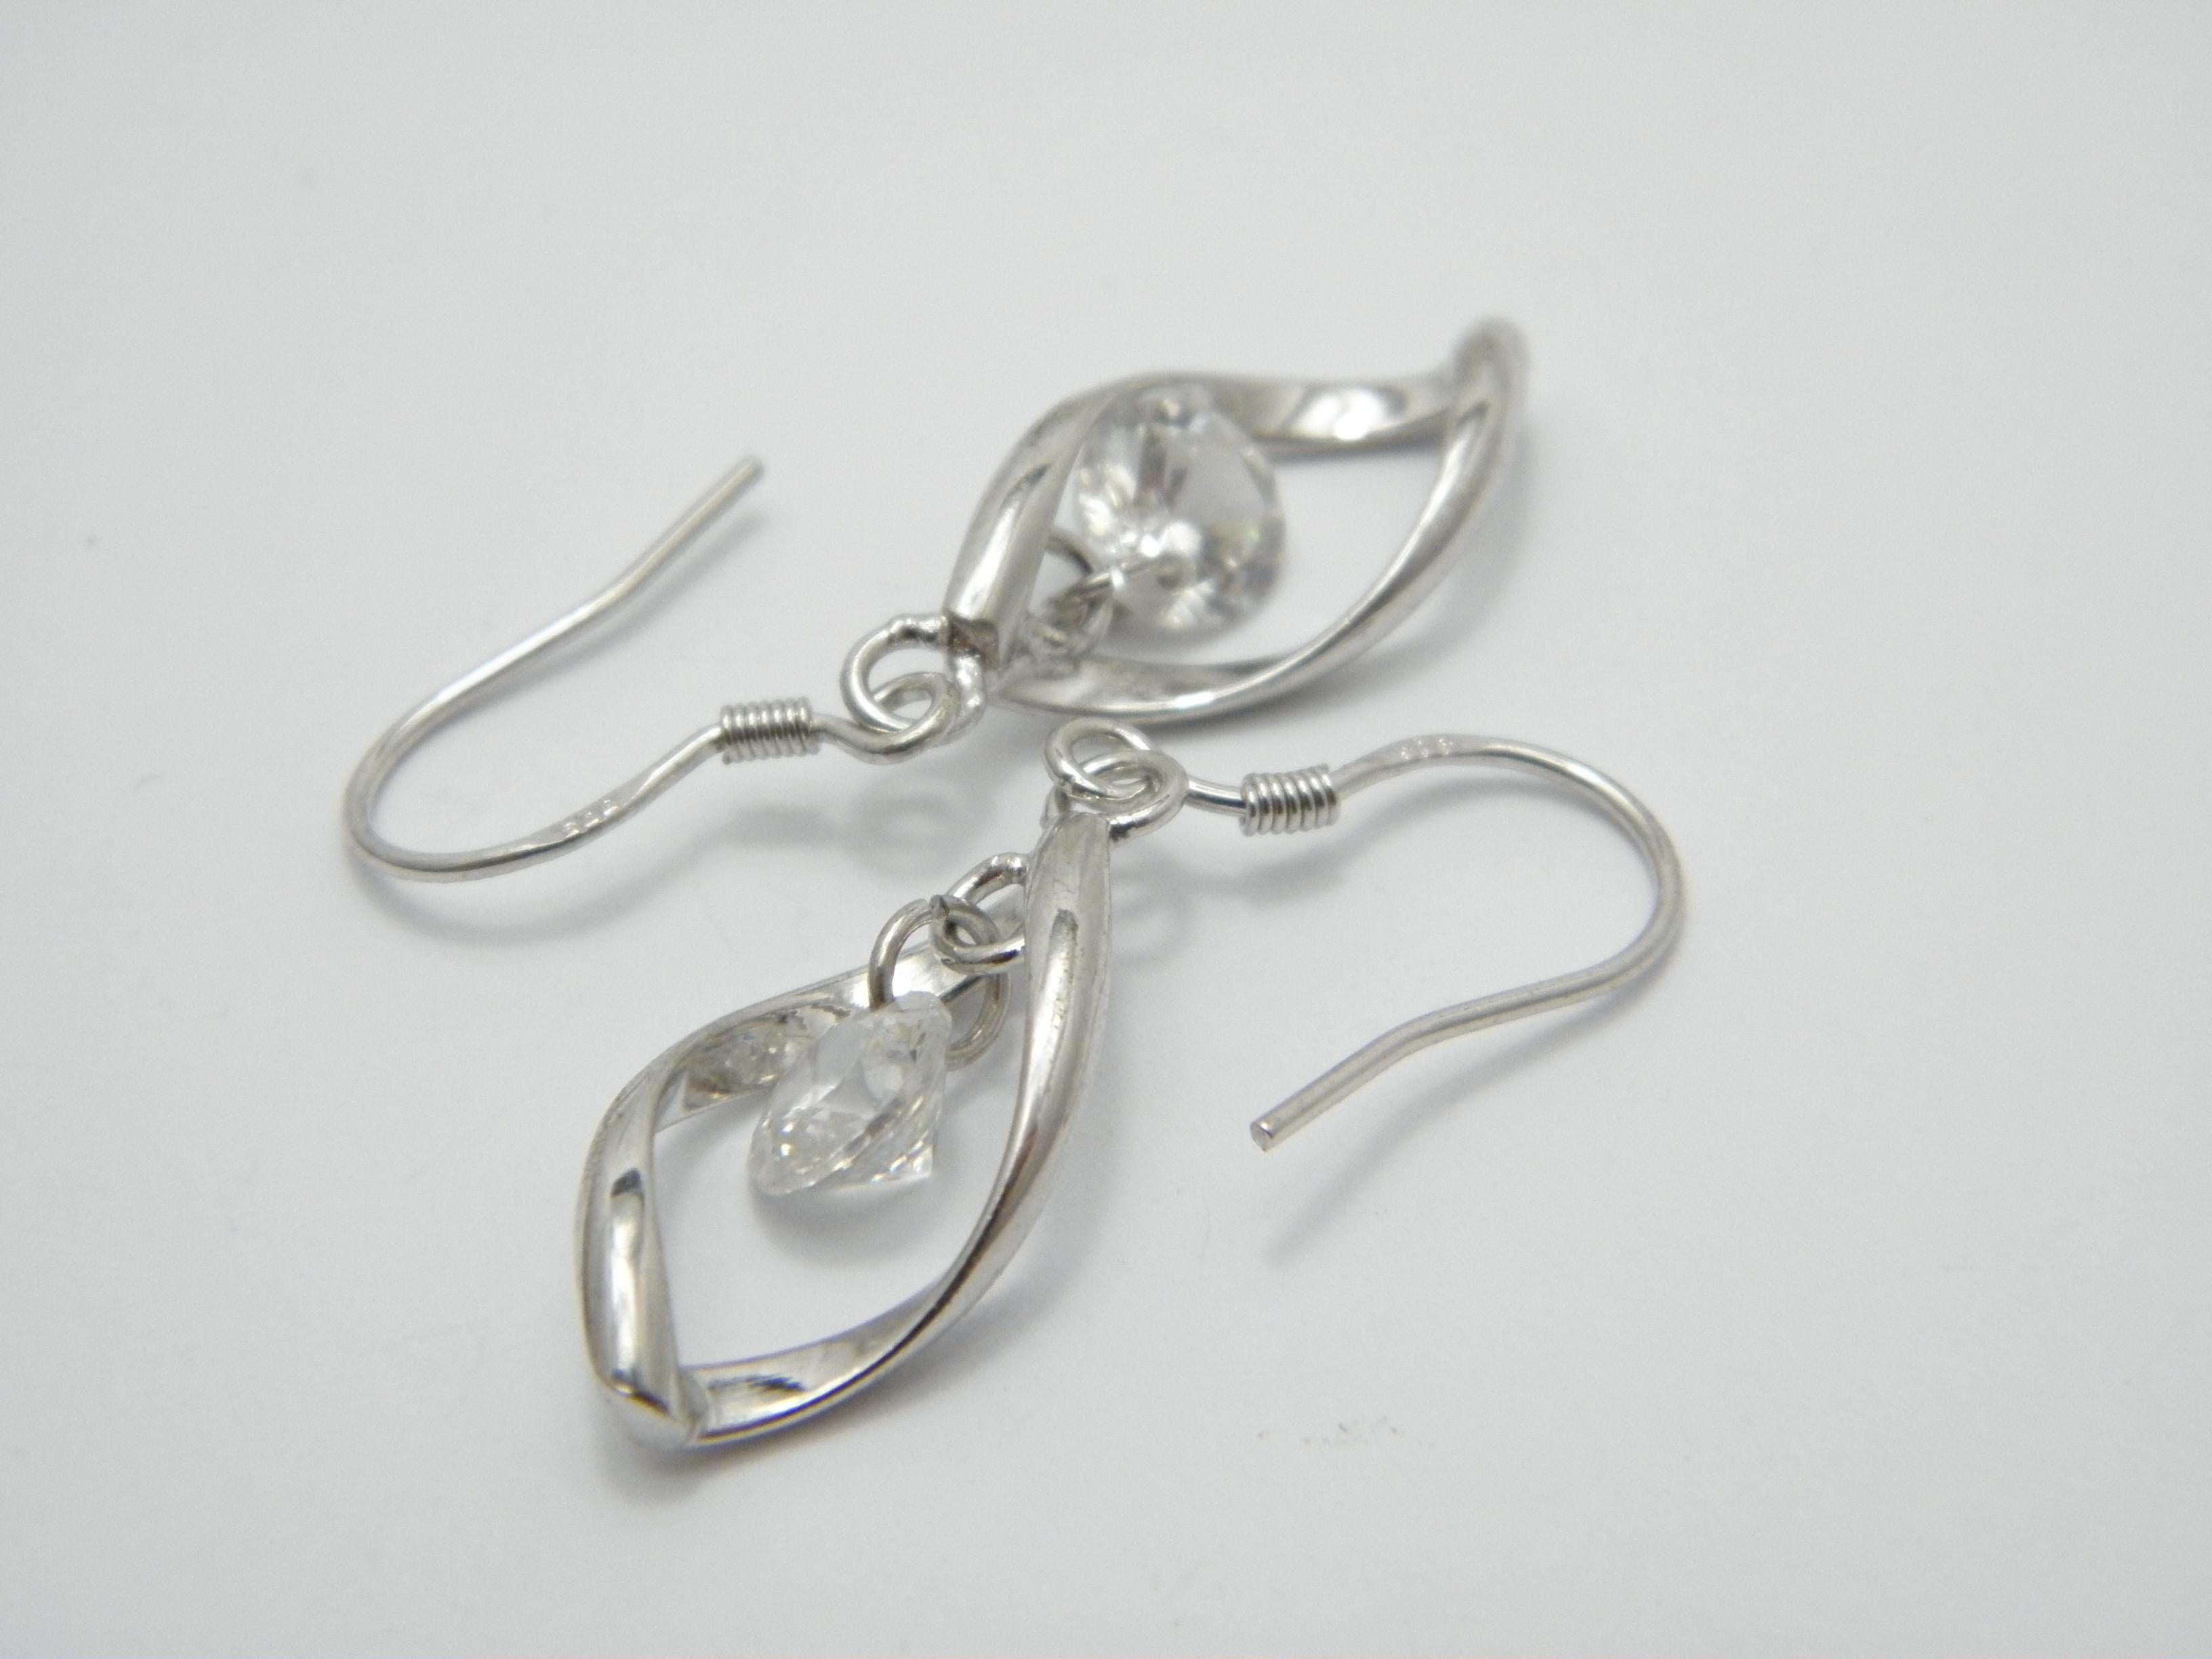 Vintage 9ct White Gold Diamond Paste Drop Dangle Earrings 375 Purity Large Heavy For Sale 3